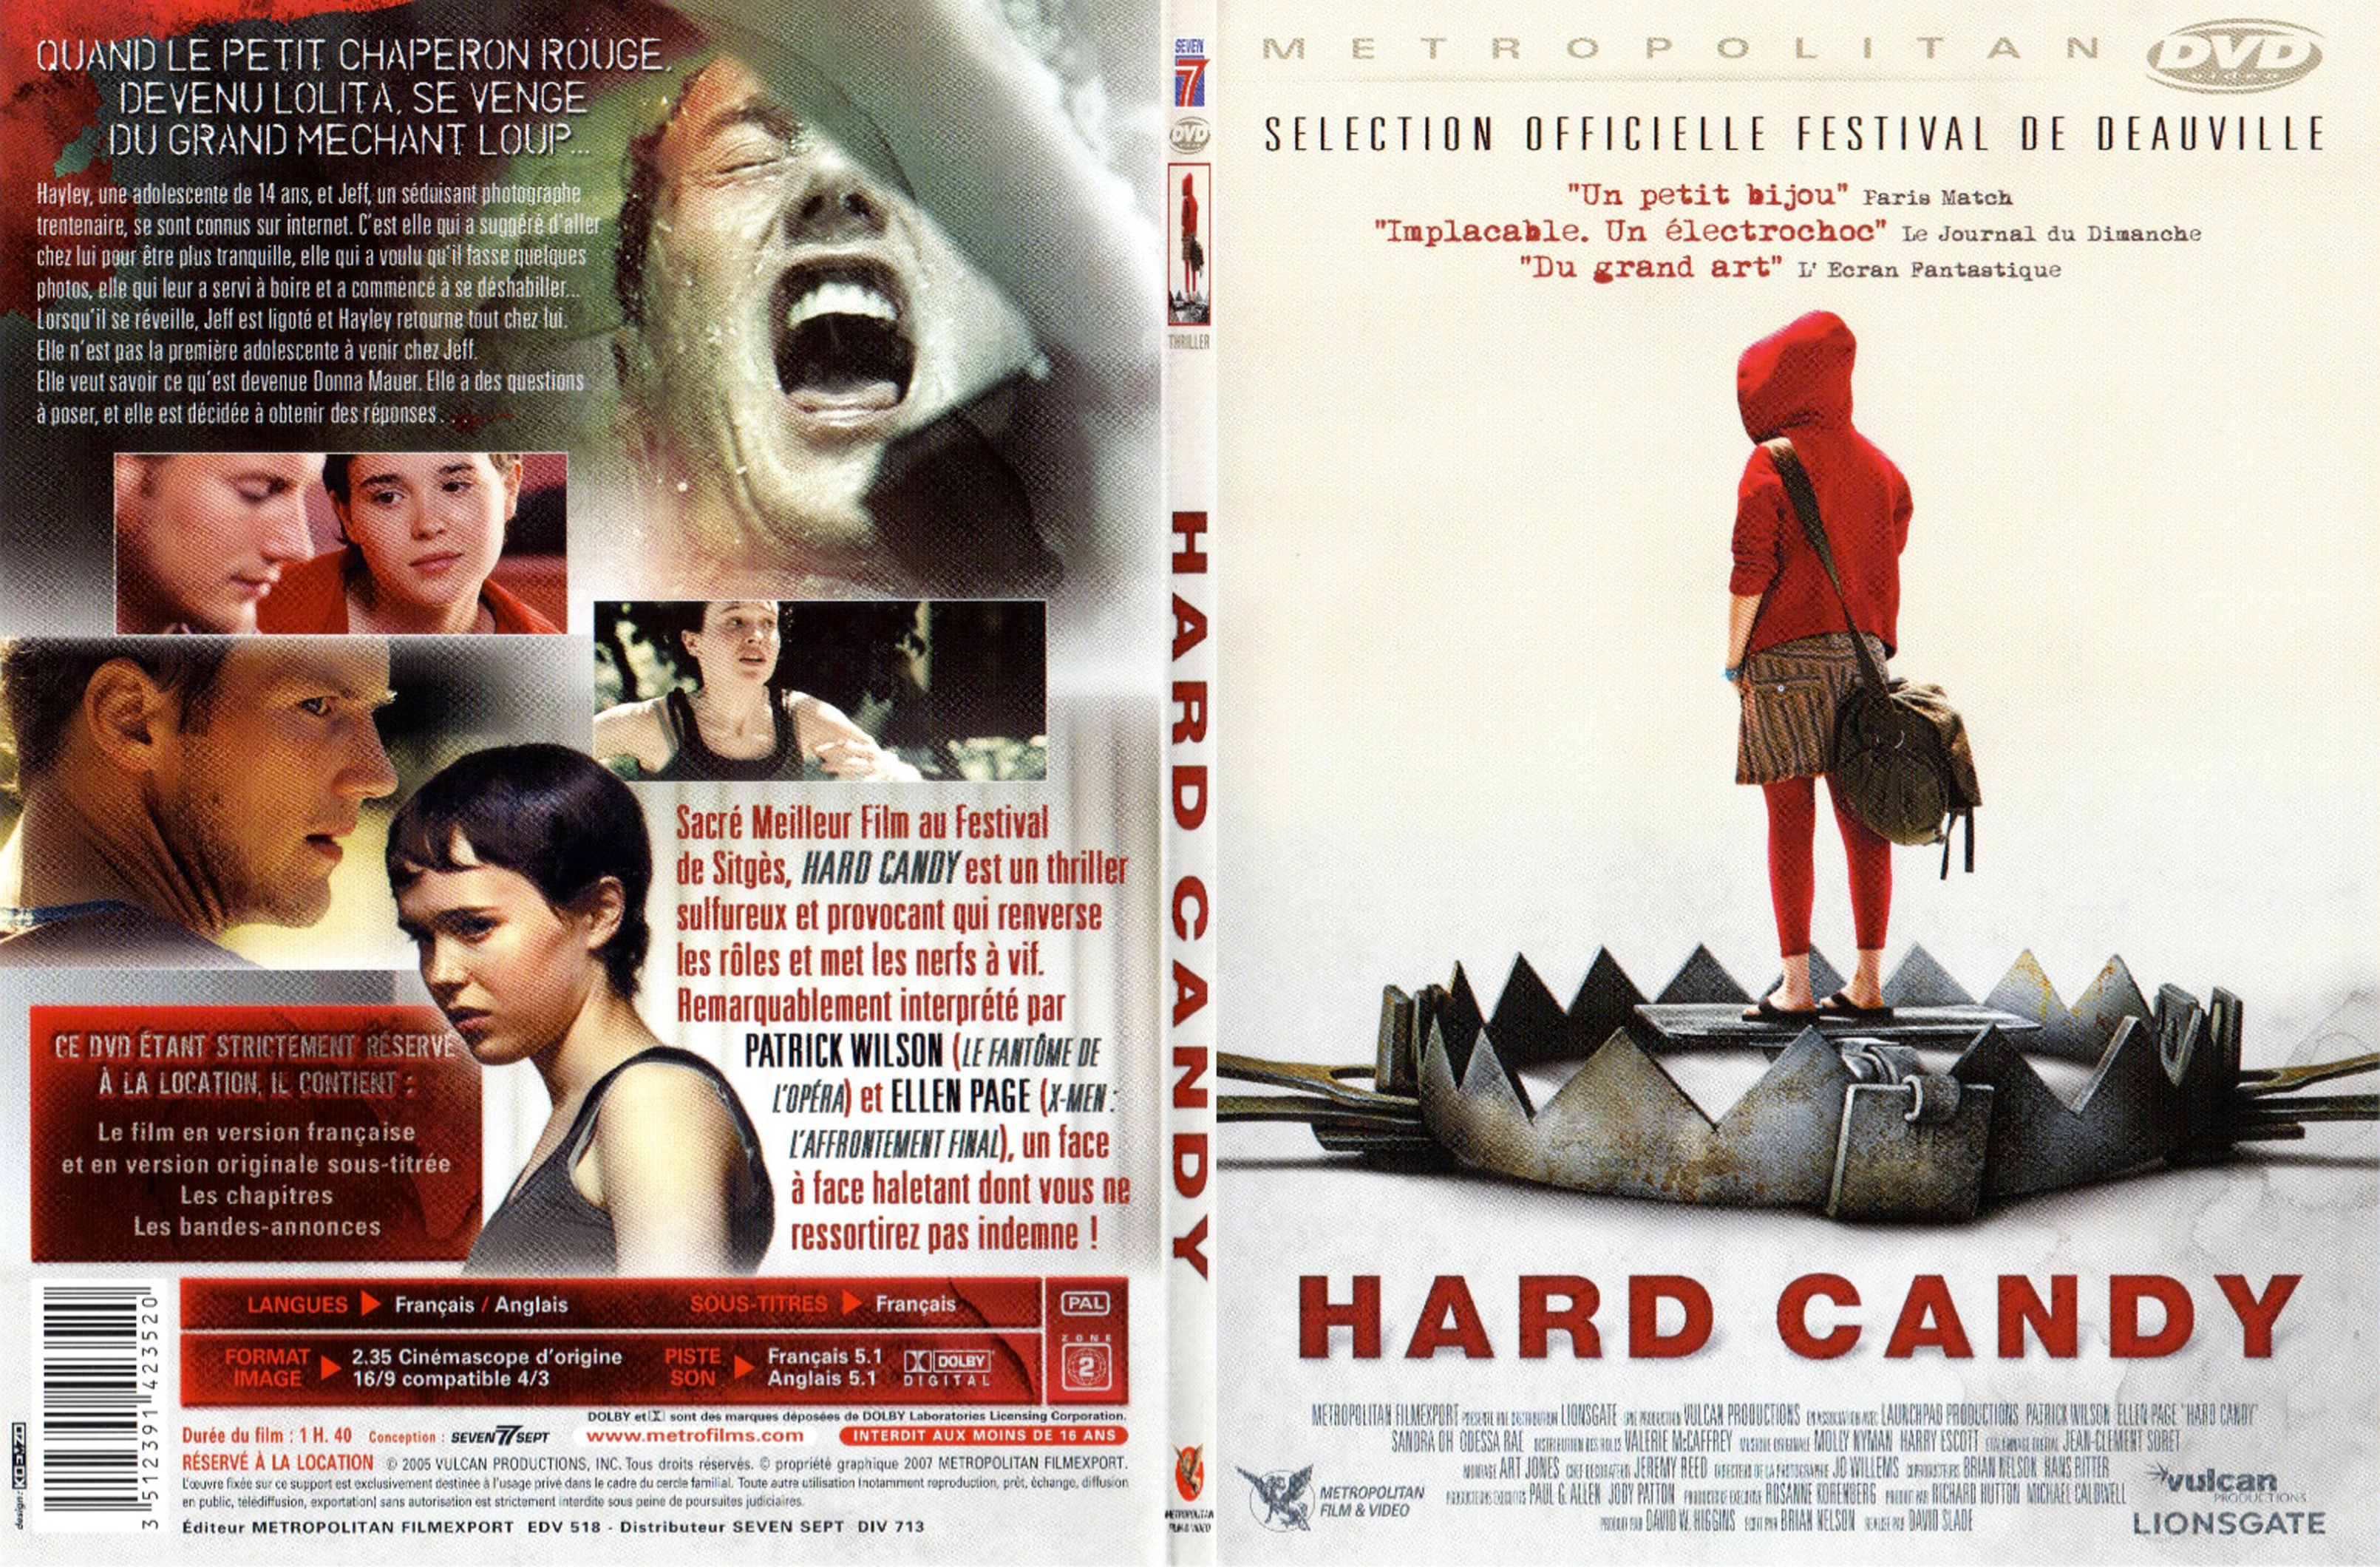 Jaquette DVD Hard candy - SLIM